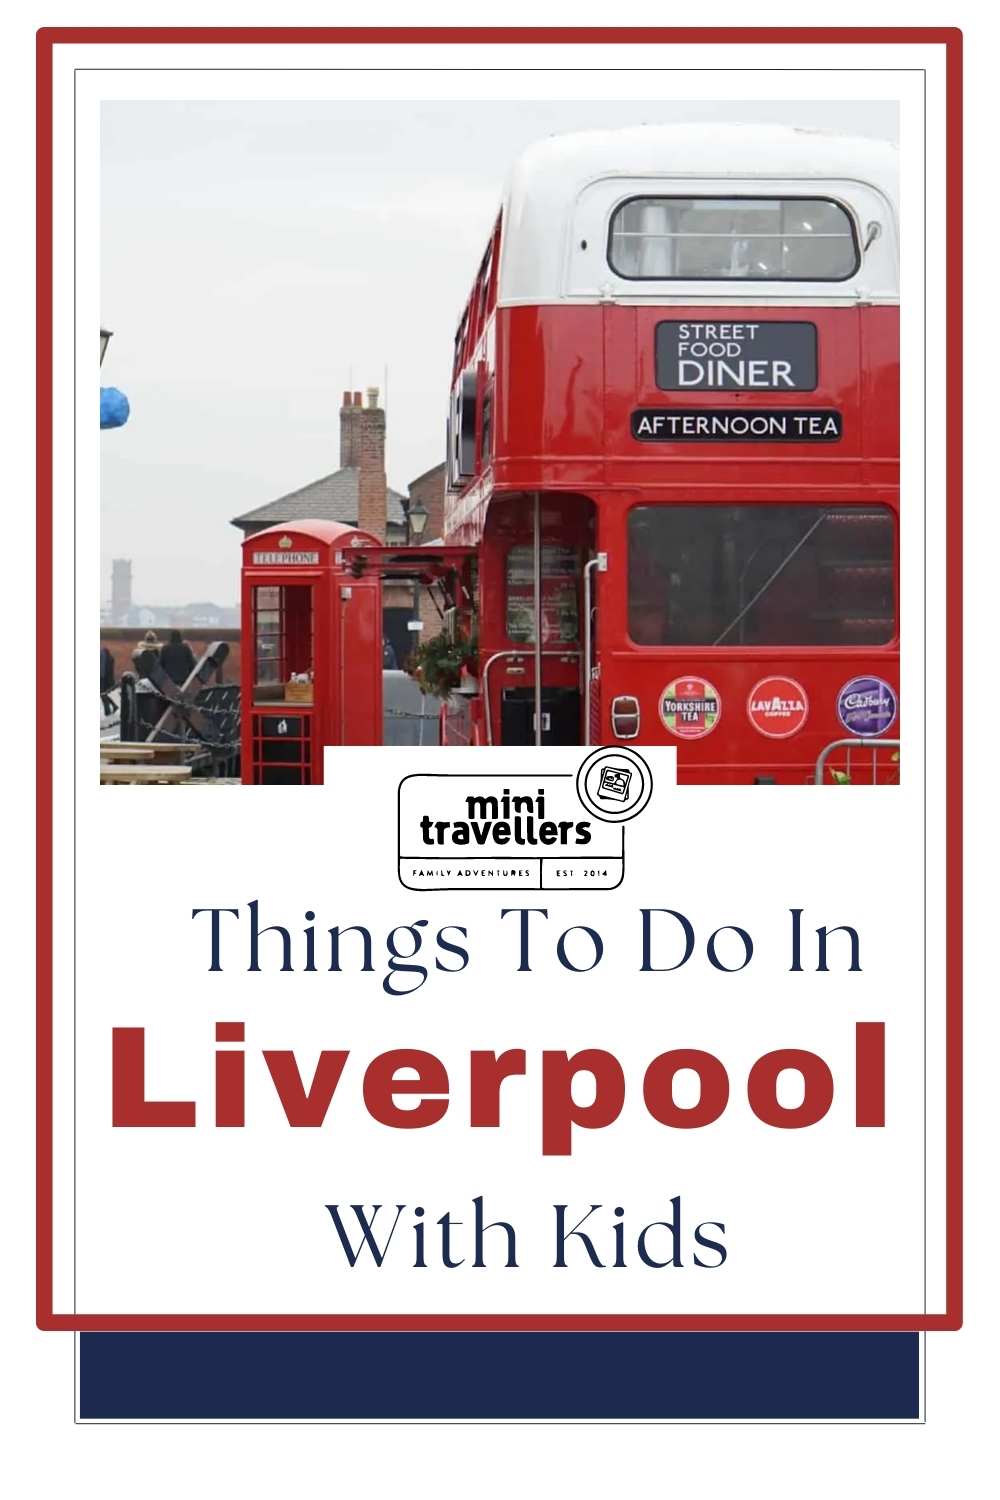 Things to do in Liverpool With Kids